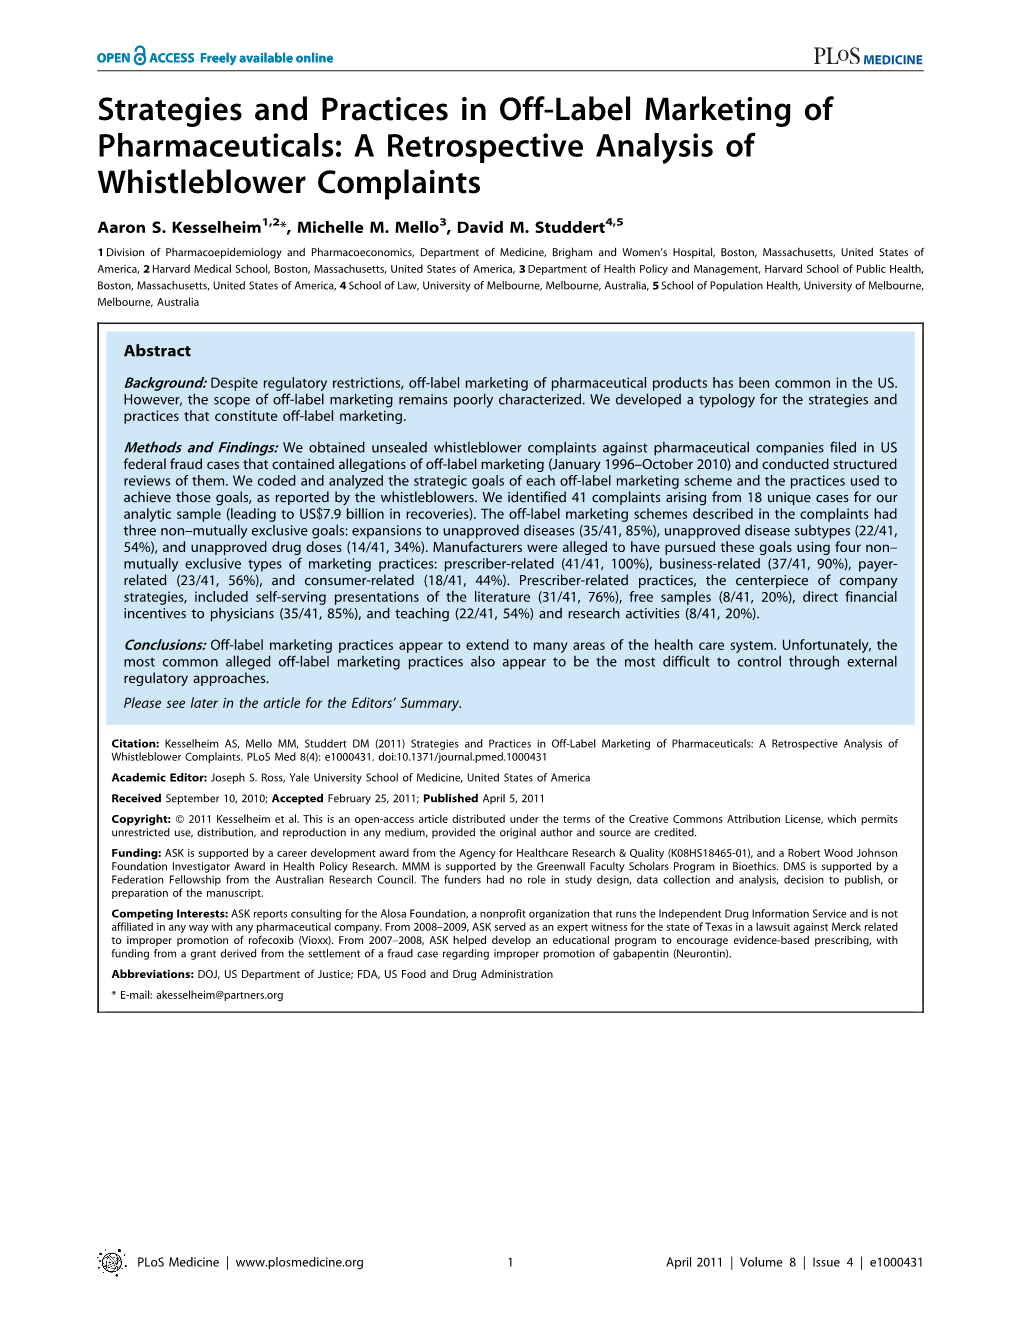 Strategies and Practices in Off-Label Marketing of Pharmaceuticals: a Retrospective Analysis of Whistleblower Complaints